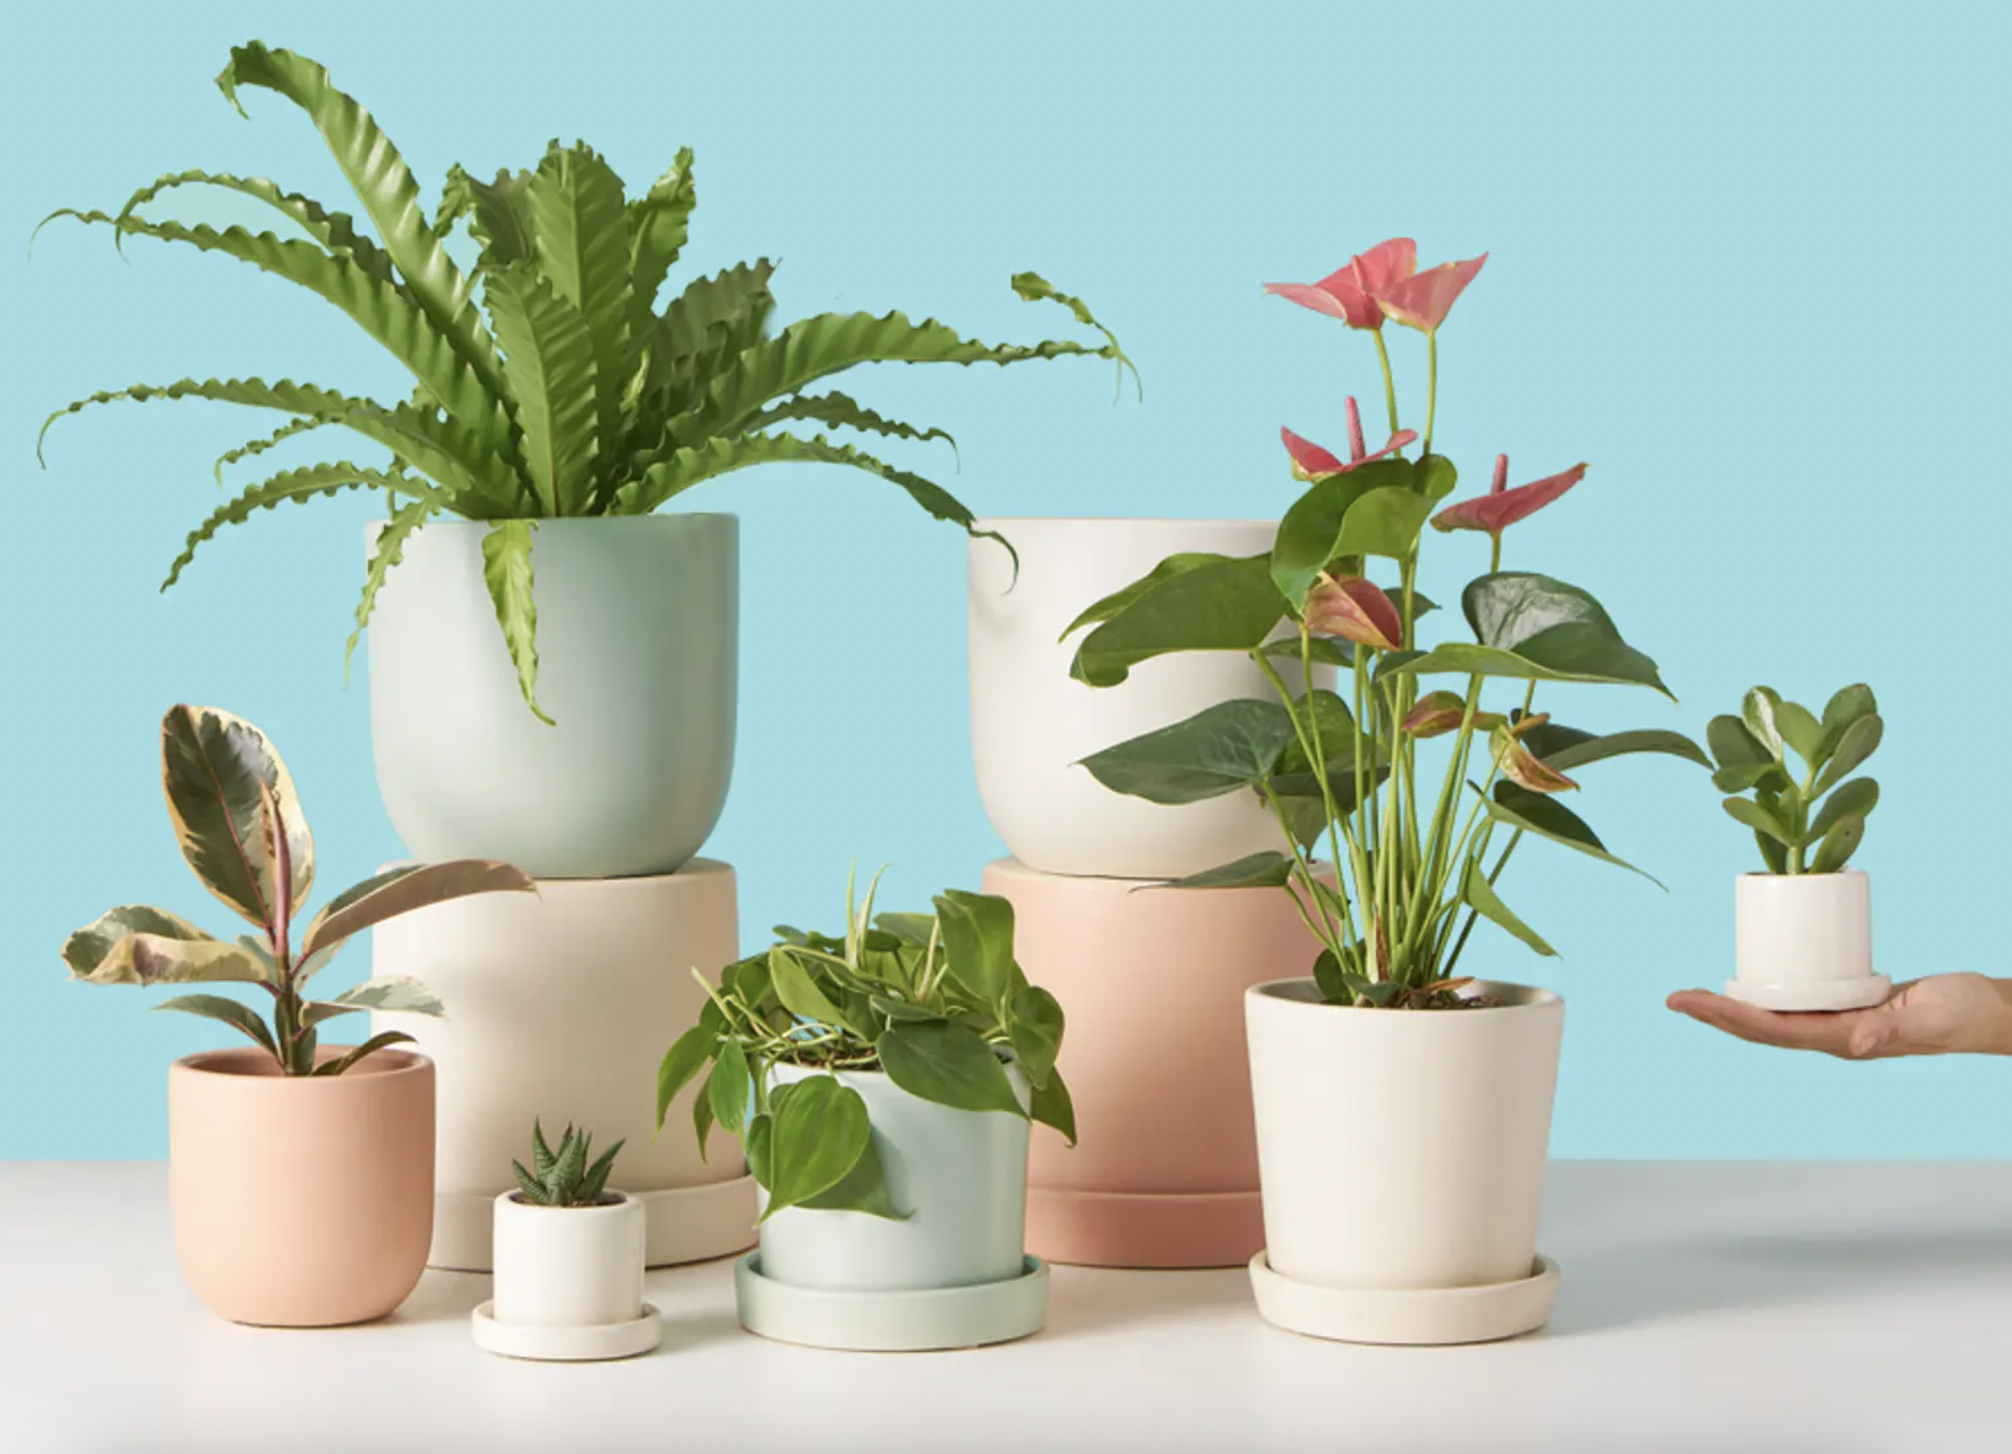 Pastel GREEN Small KNIT Inspired Indoor/Outdoor Garden Plant Pot Planters 